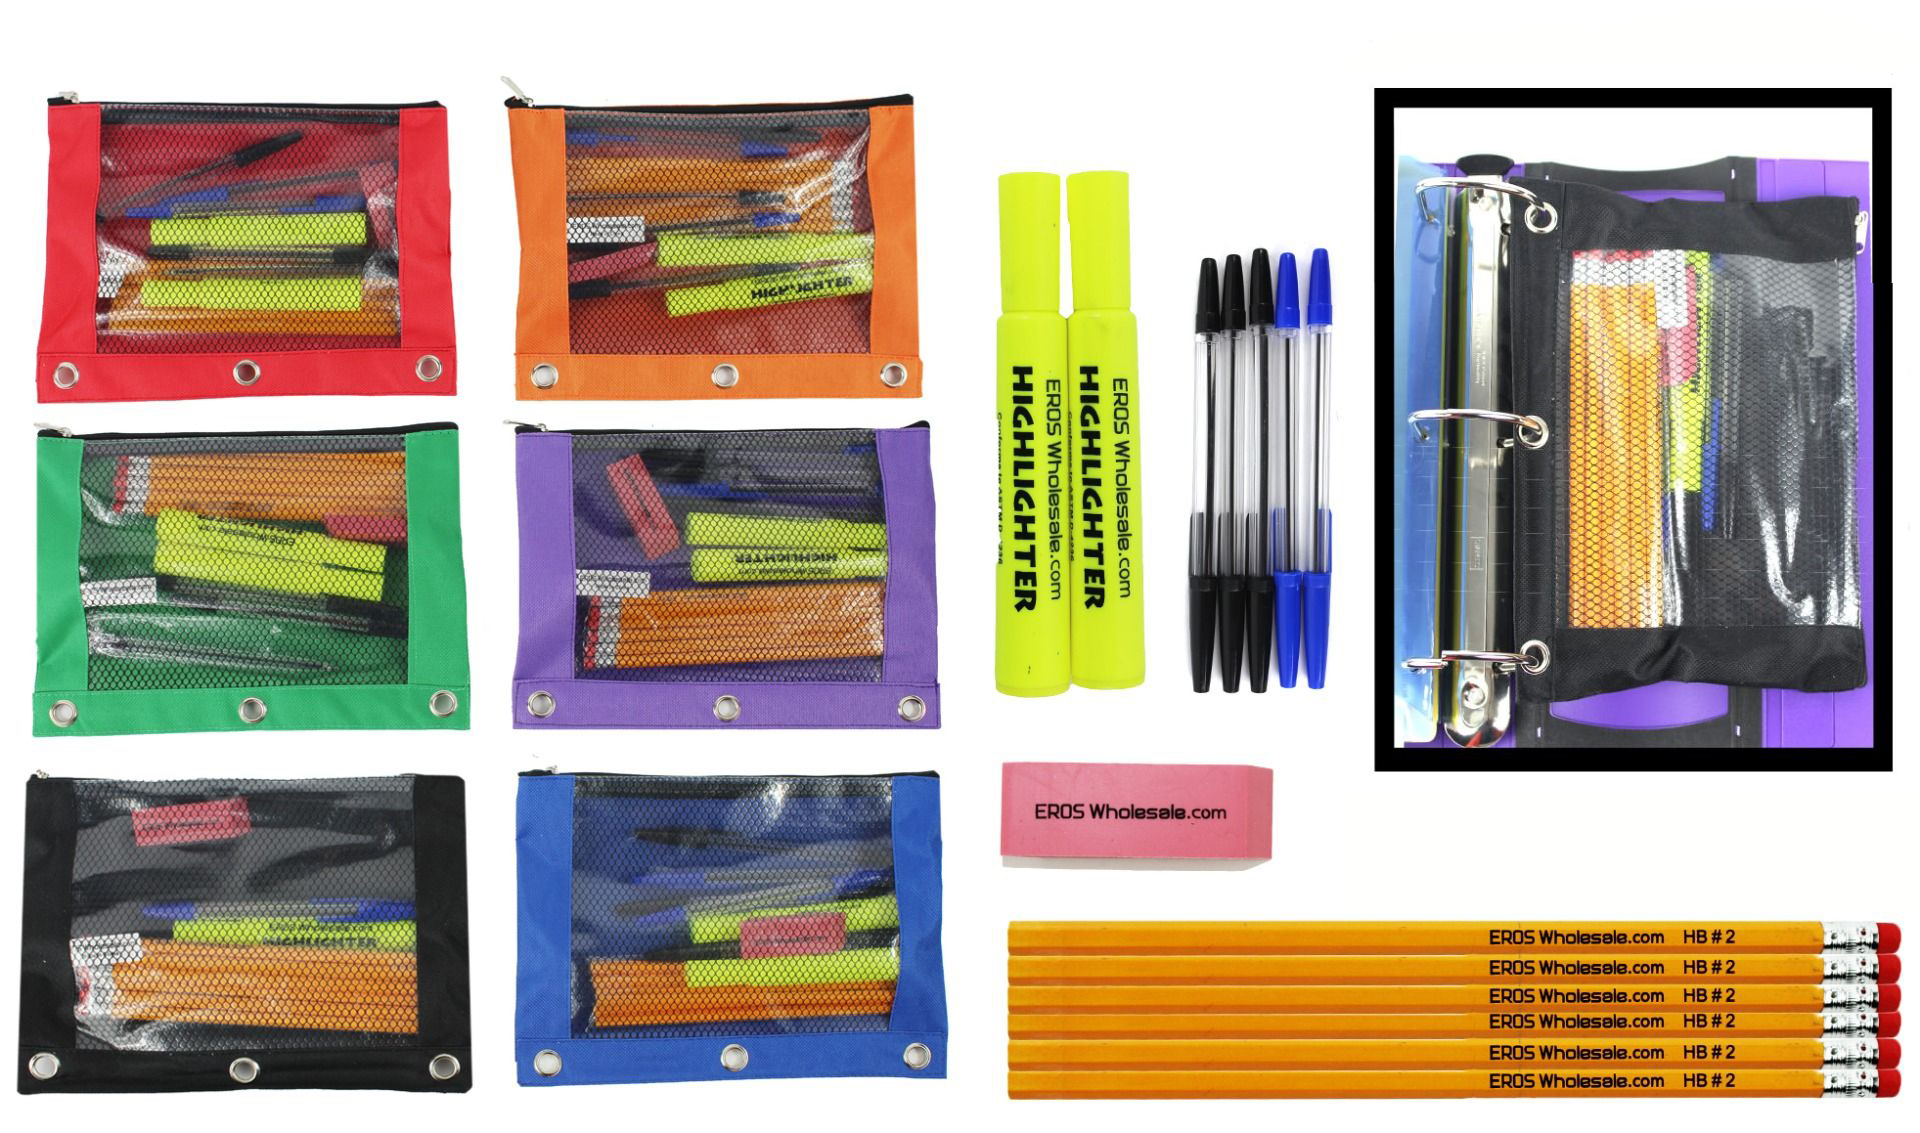 Wholesale soccer pencil case For Your Pencil Collections 